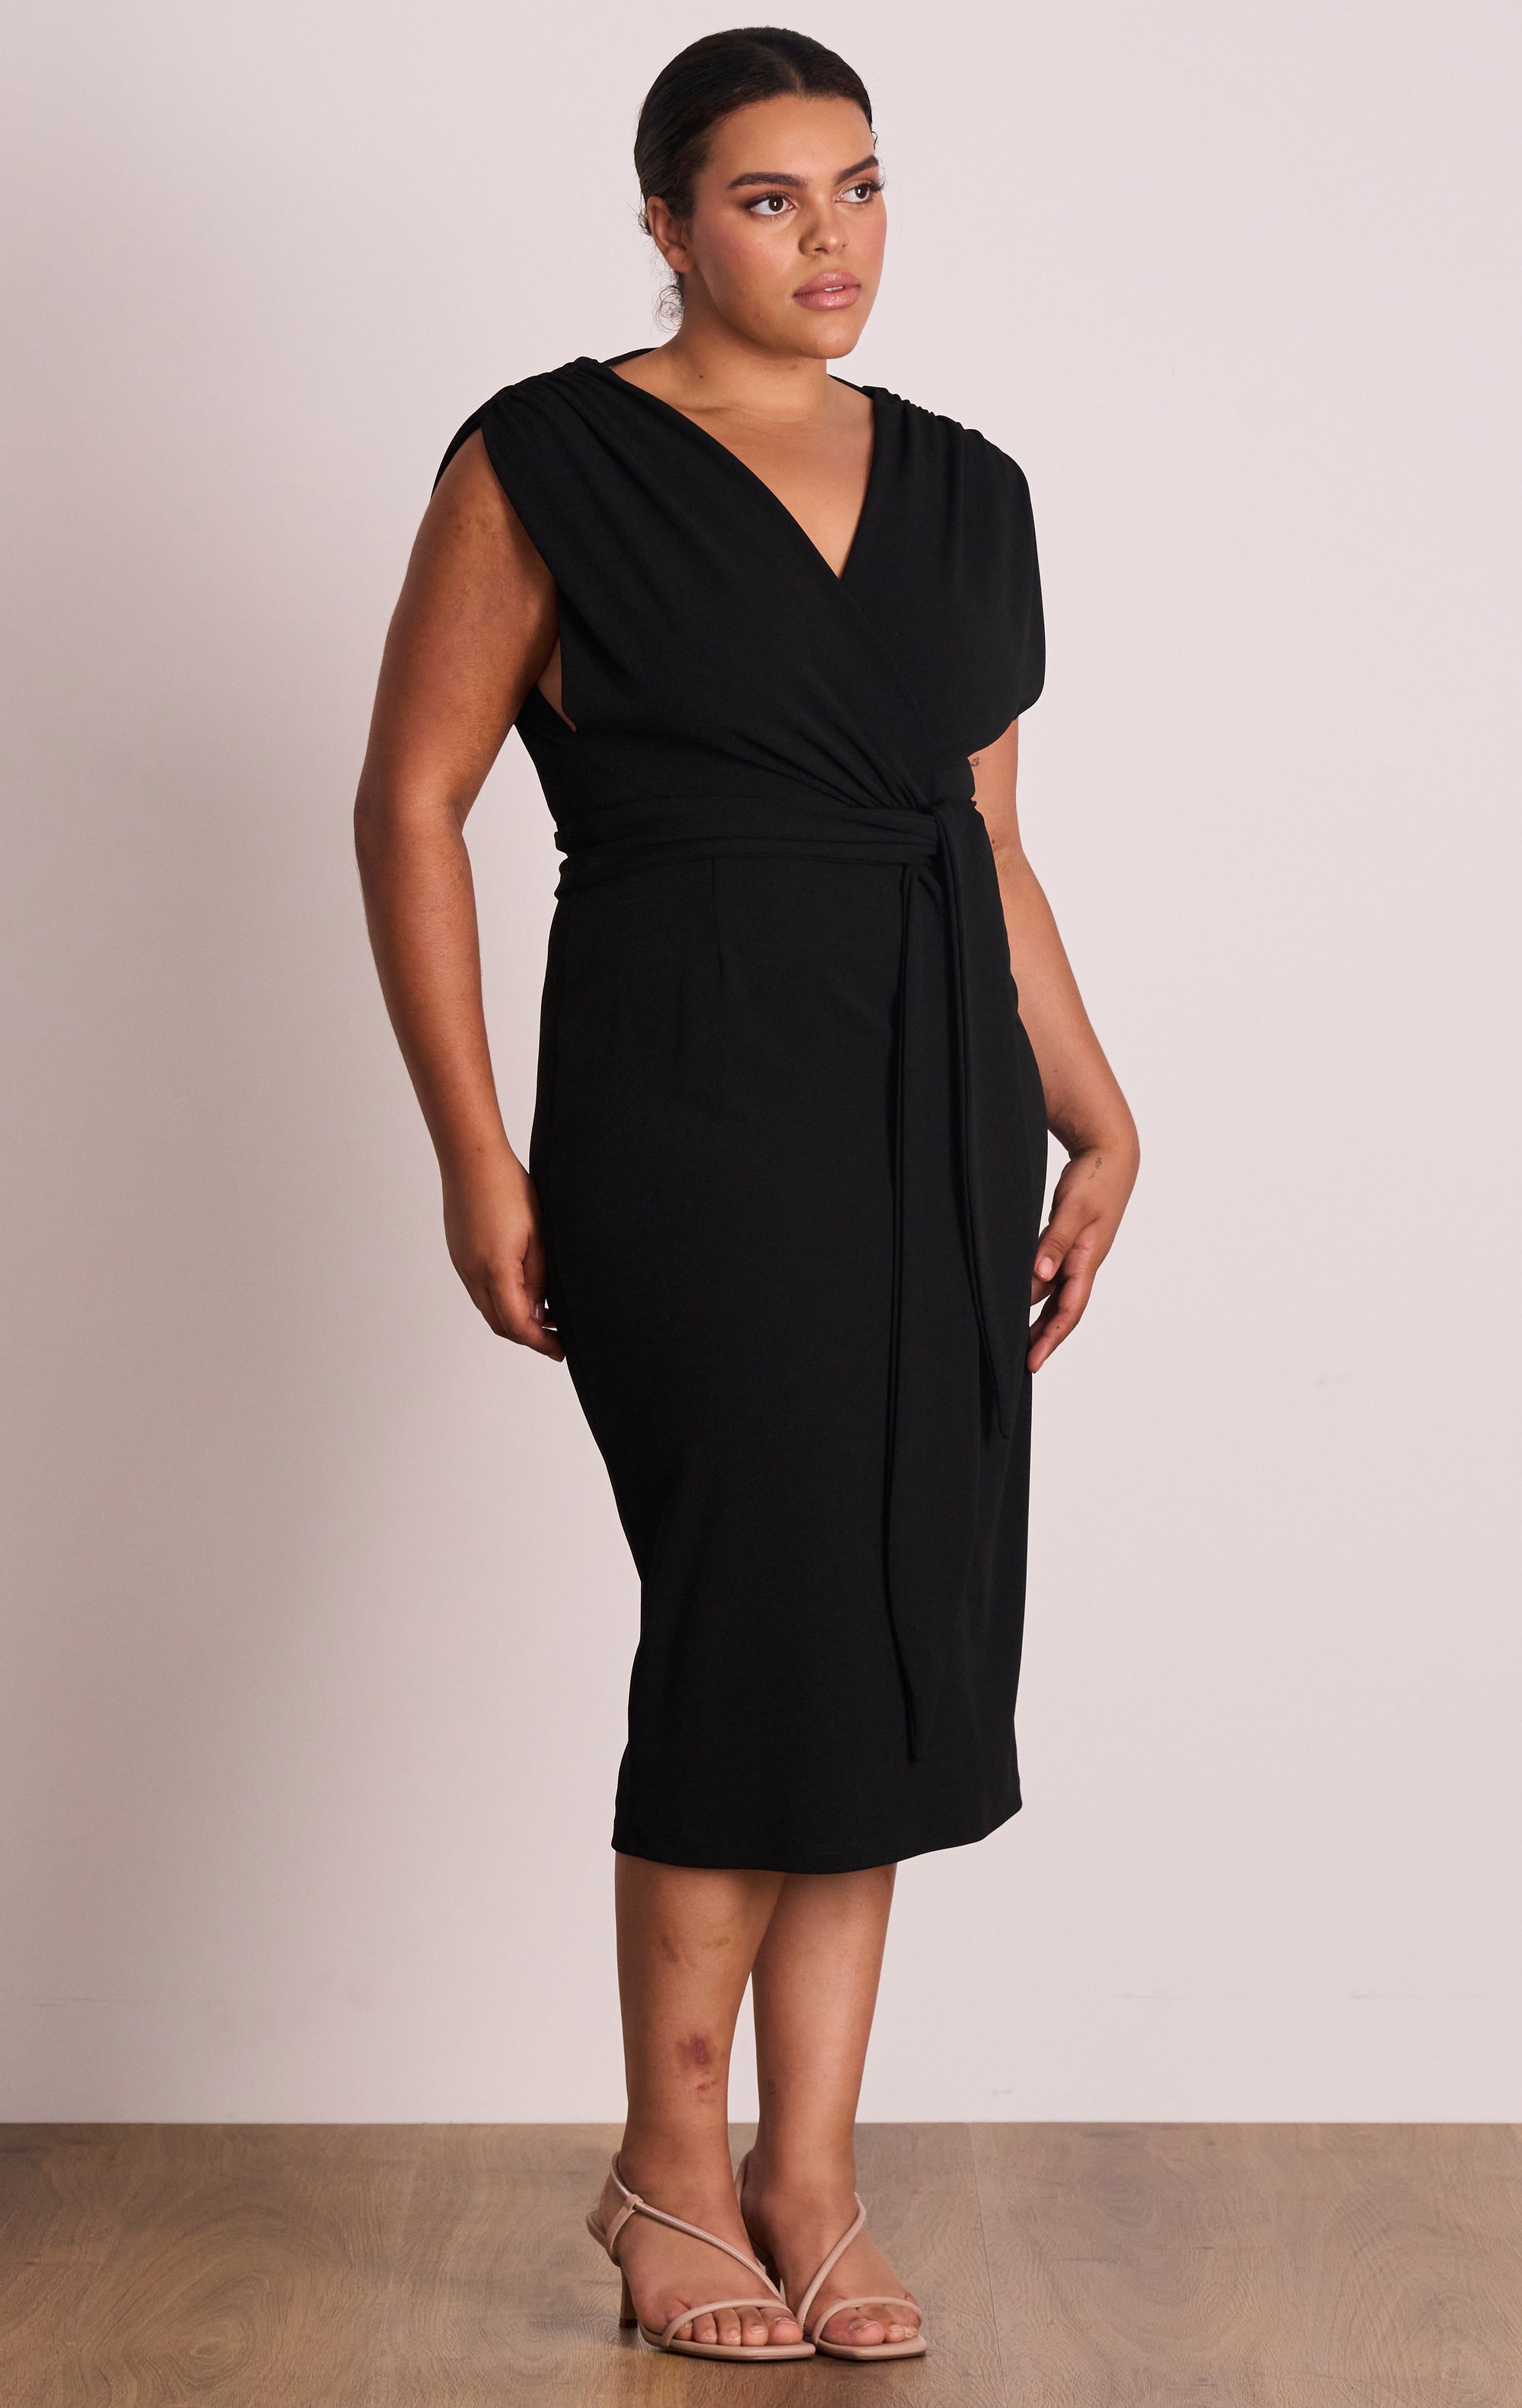 Radiance Midi - TAKE 40% OFF DISCOUNT APPLIED AT CHECKOUT